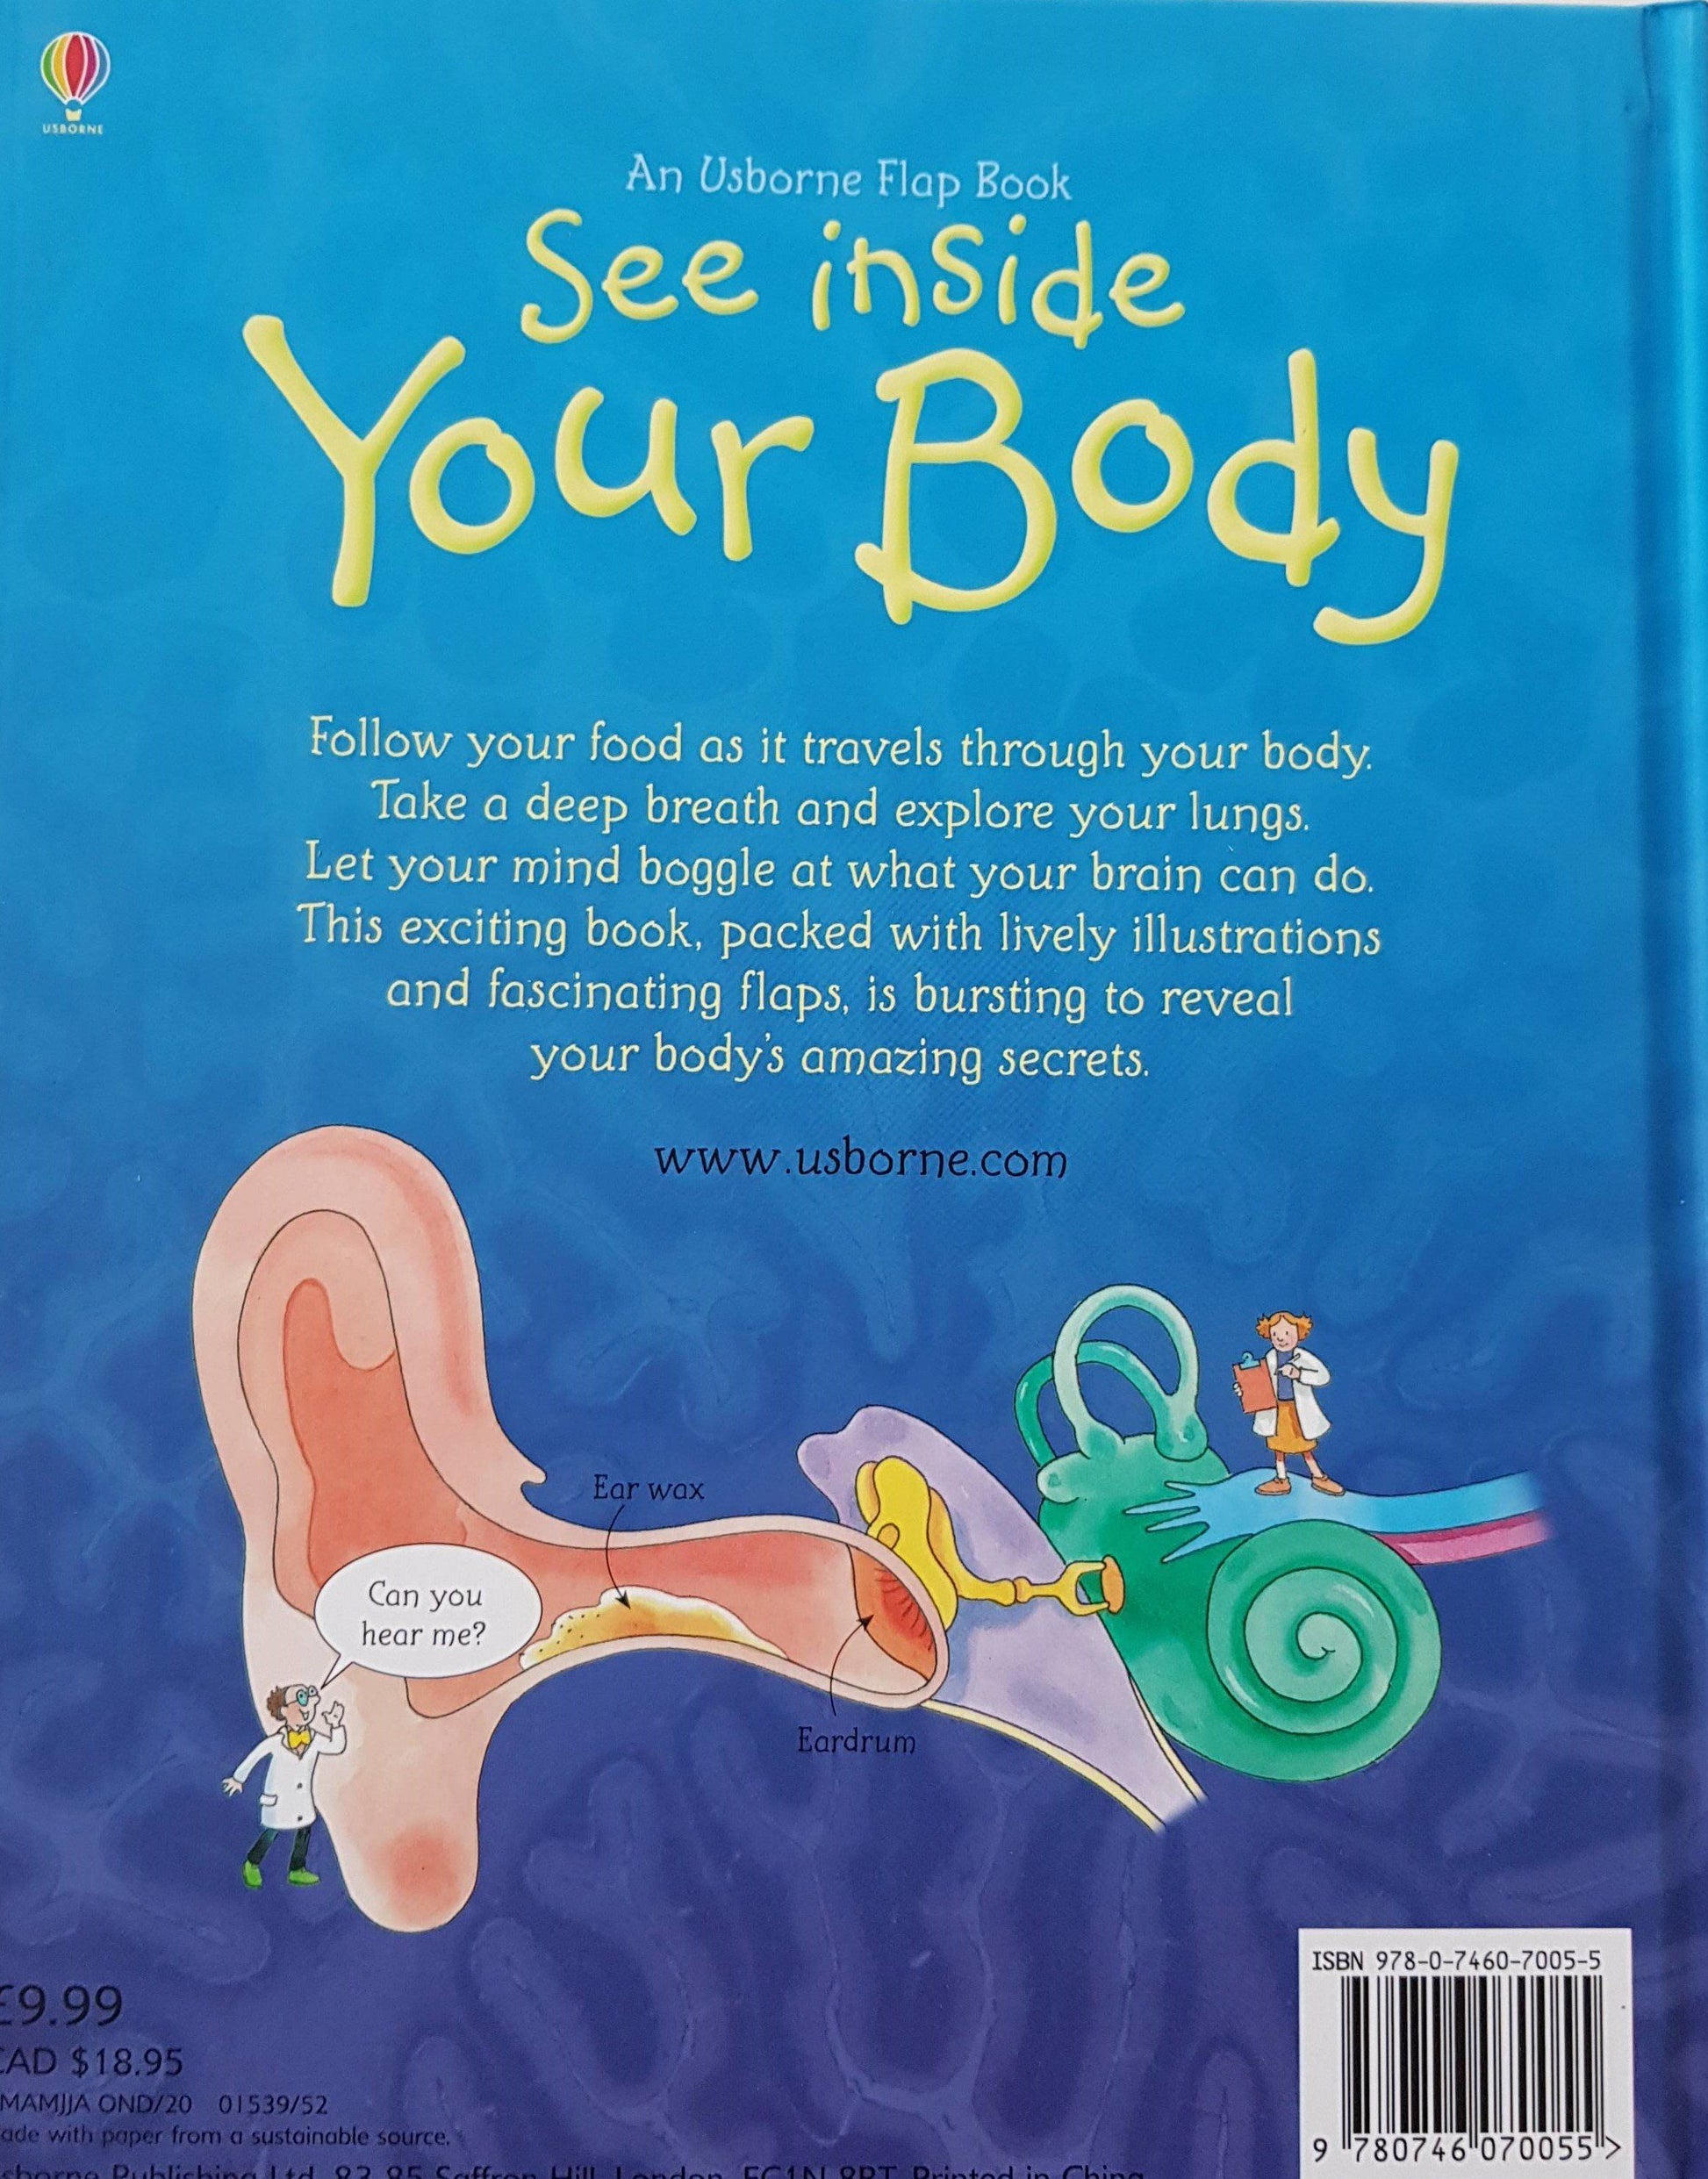 See inside your Body New Usborne  (6269349429433)